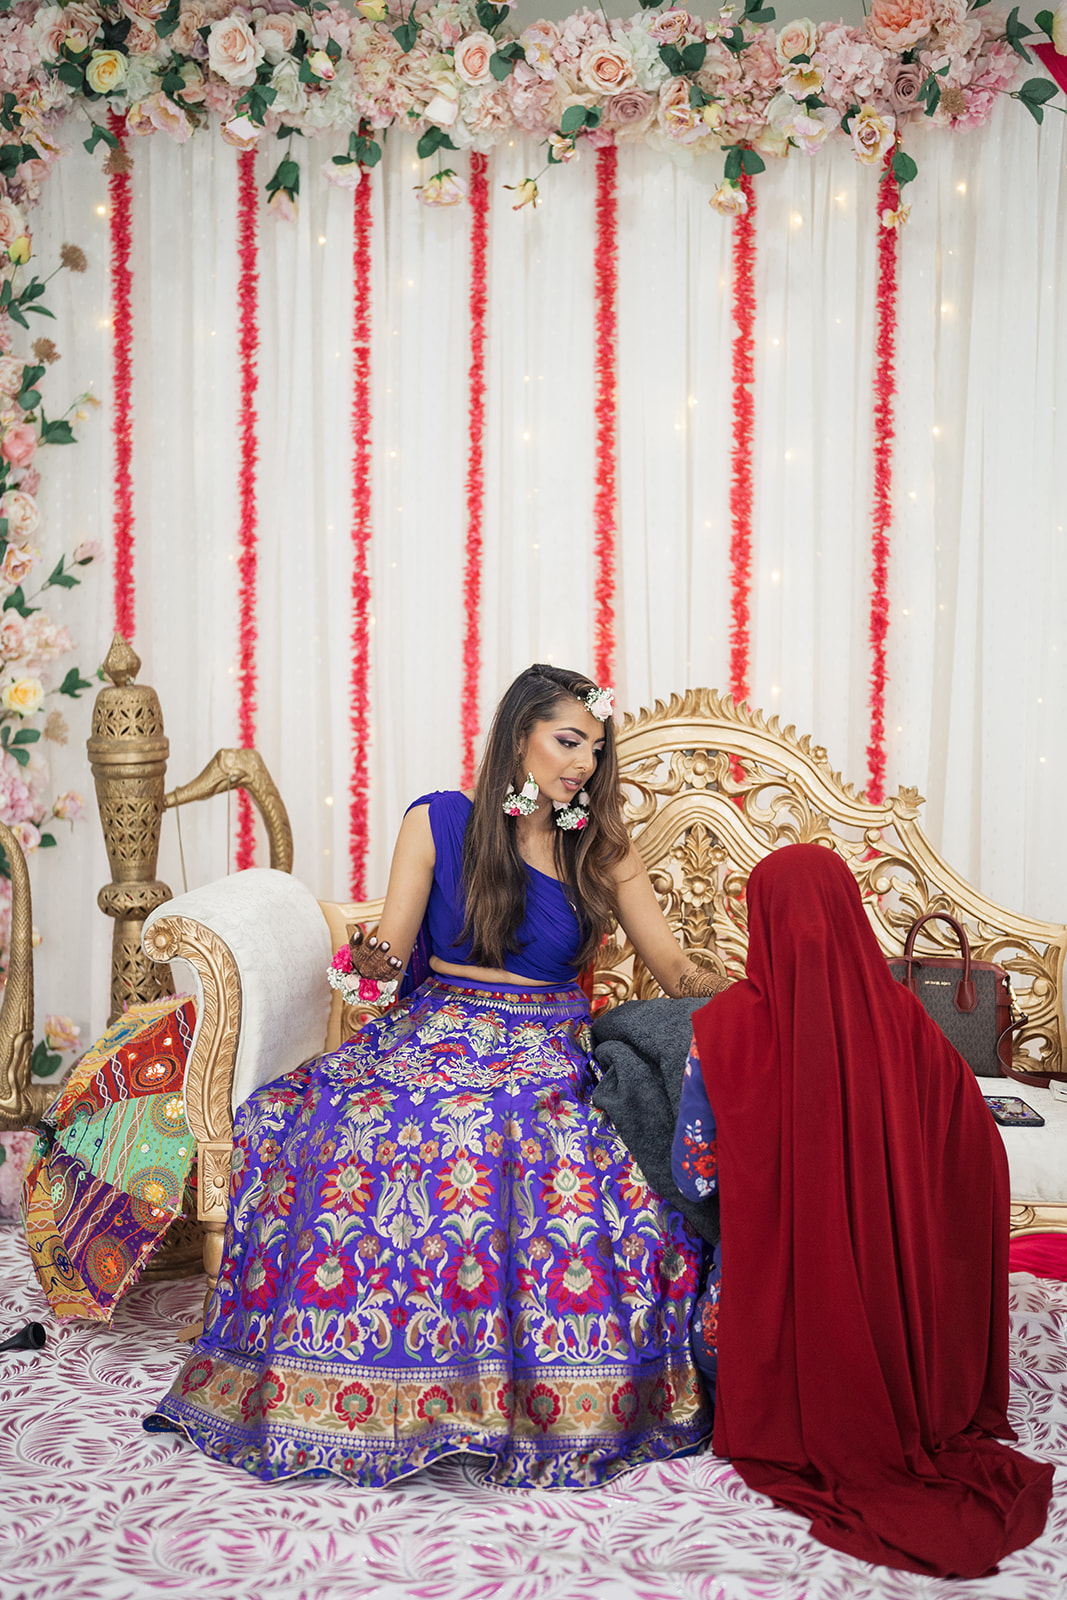 City Beach Function Centre wedding for Prianca and Karan. Photographed by Rolling Canvas Photography